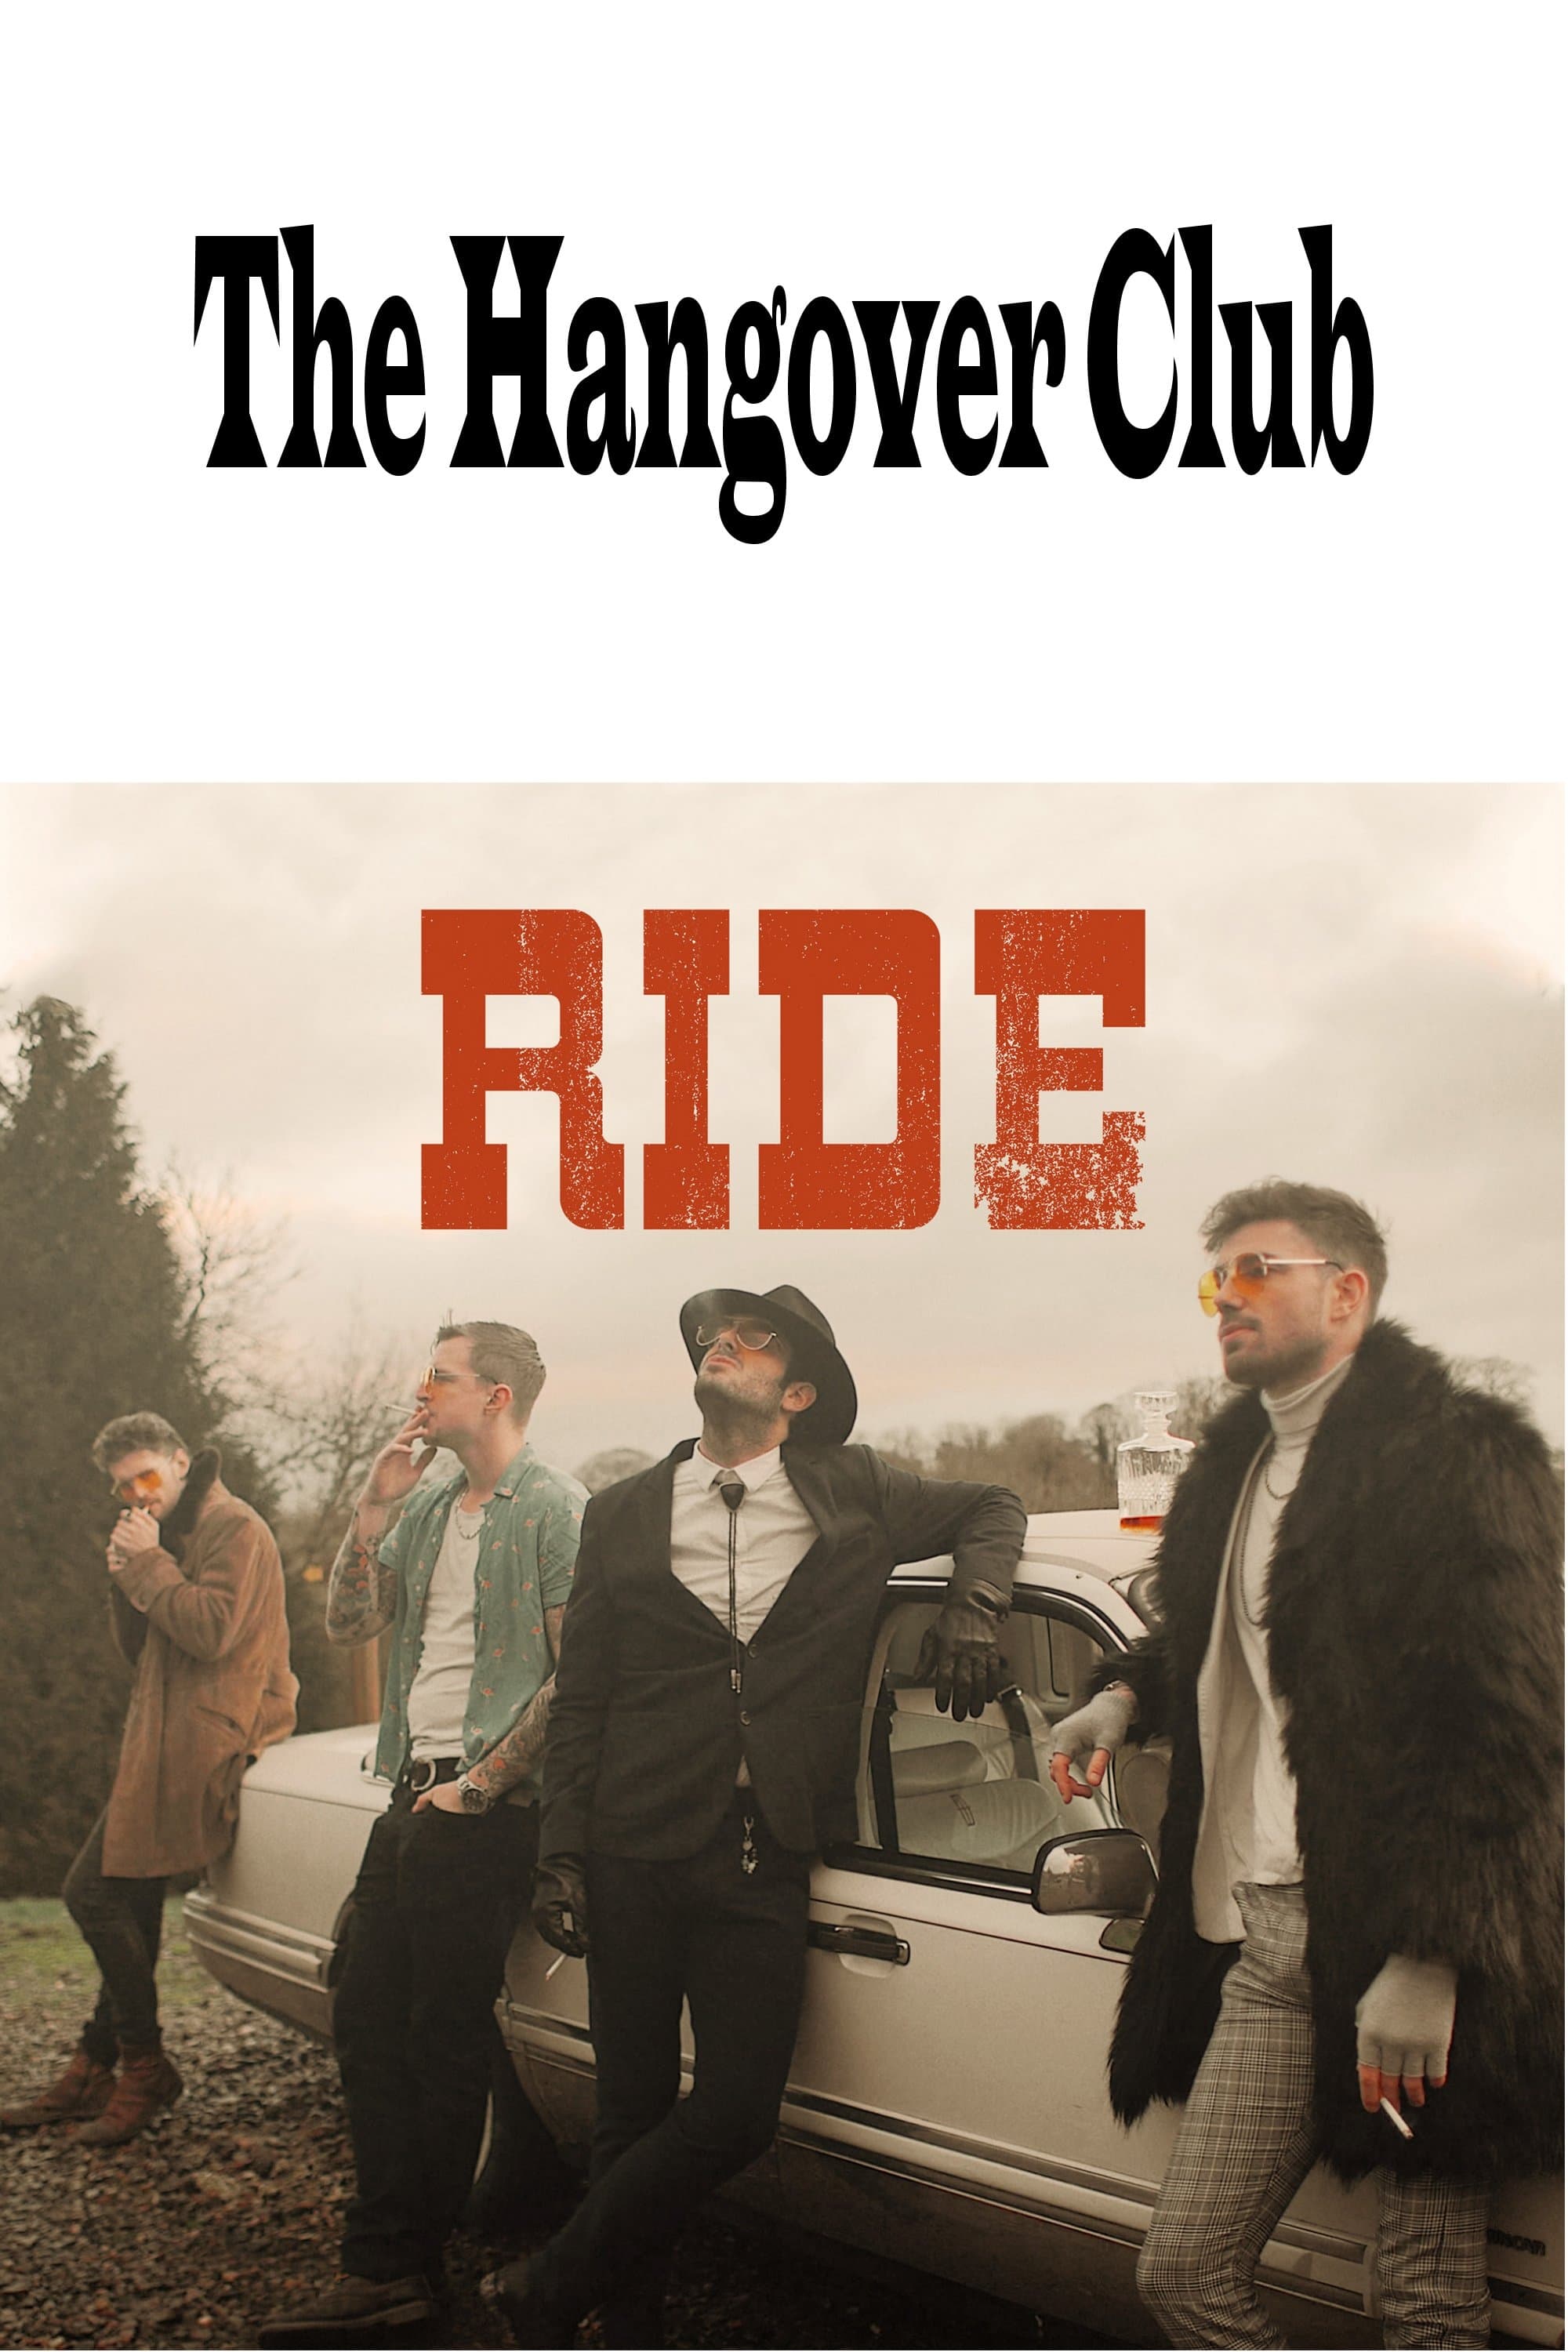 The Hangover Club - Ride